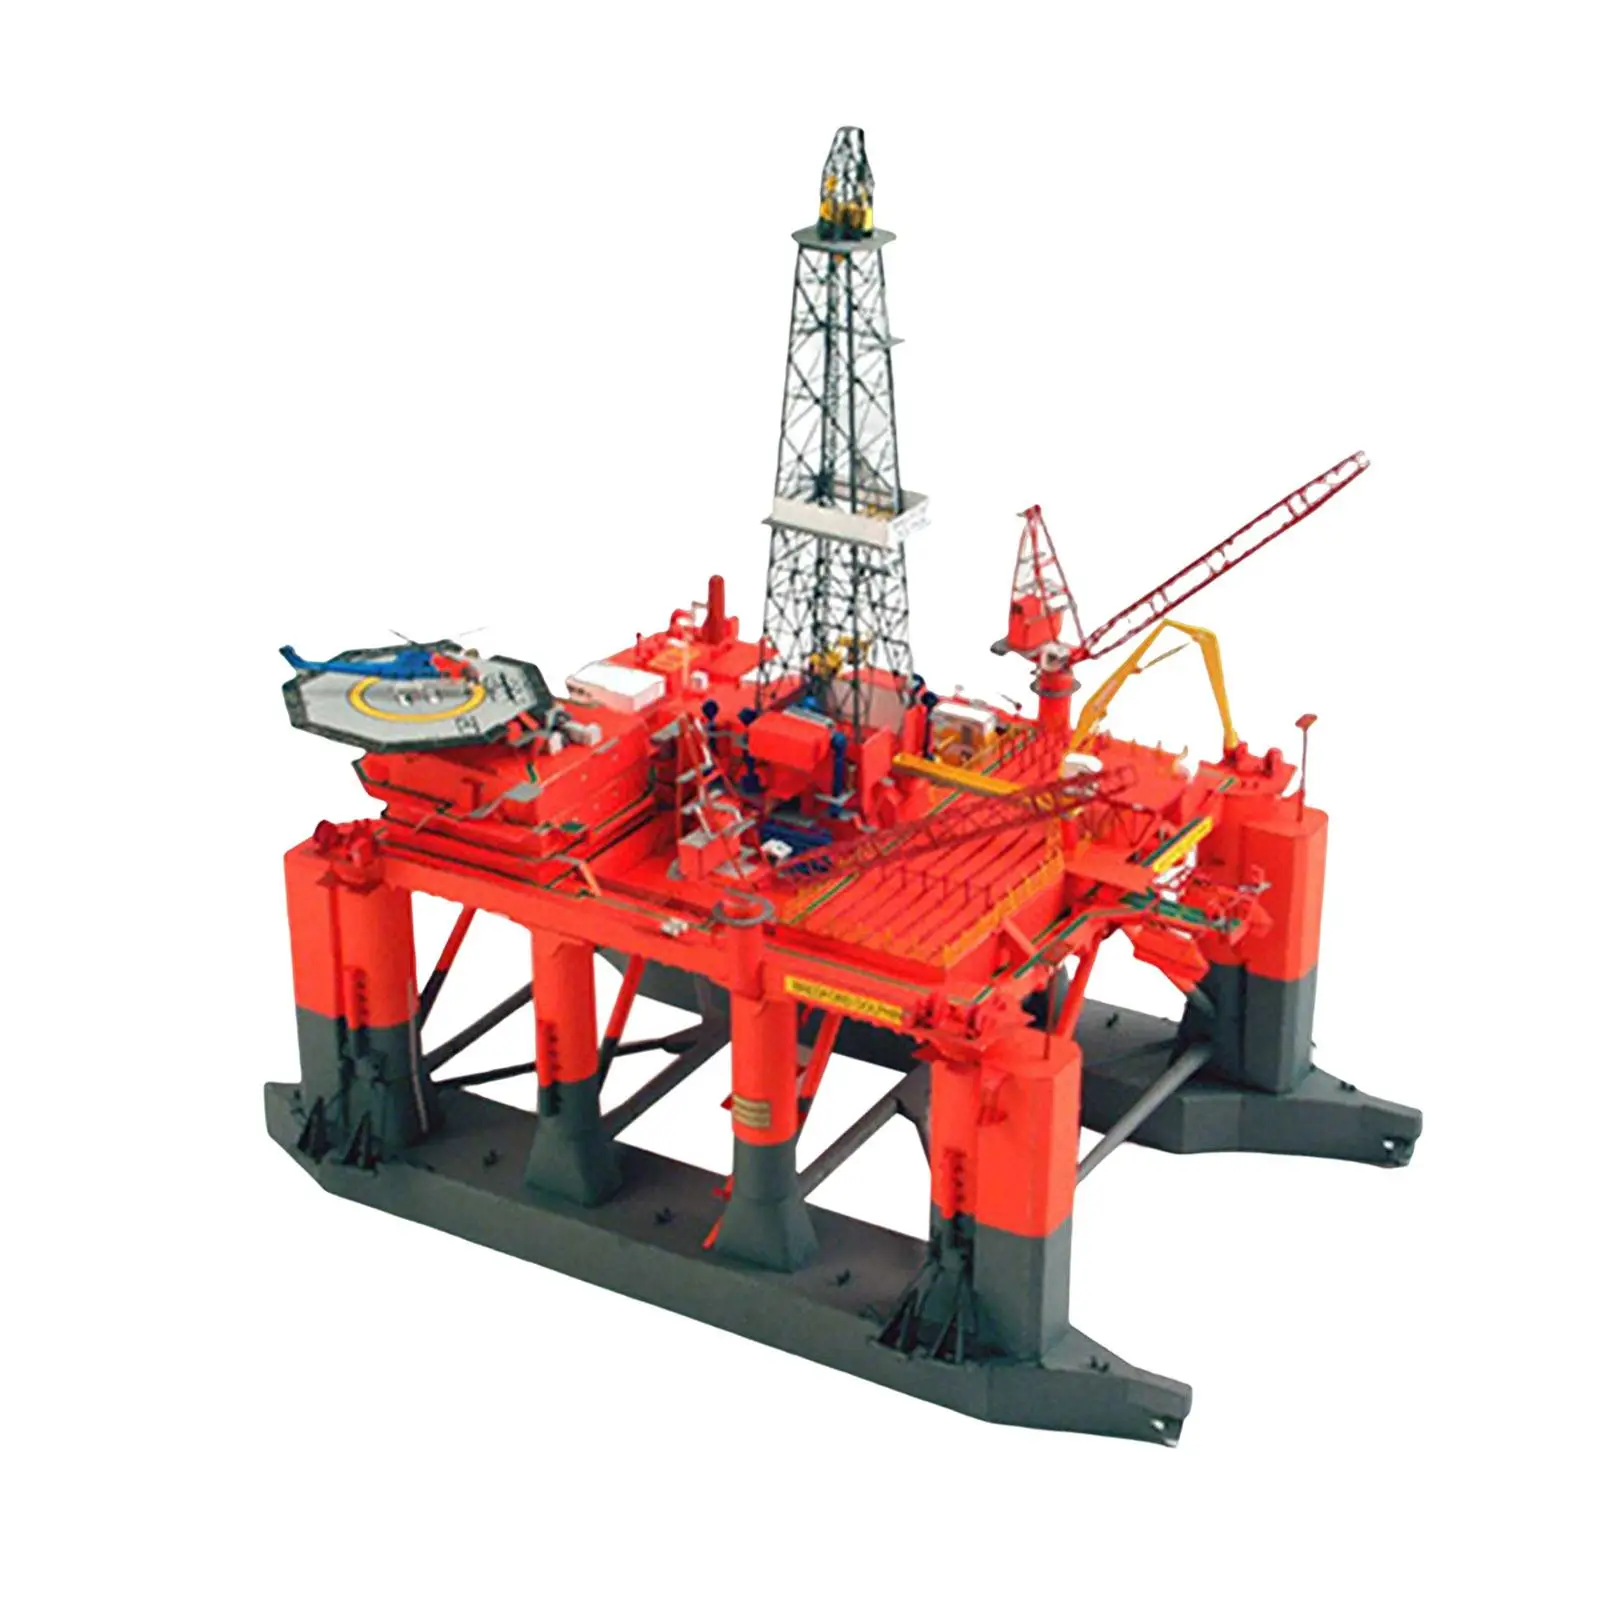 3D 1/400 Semi Submersible Oil Rig Paper Crafts DIY Kit Accessories Included Finished Size 27x16.8cm Durable Sturdy Ornaments